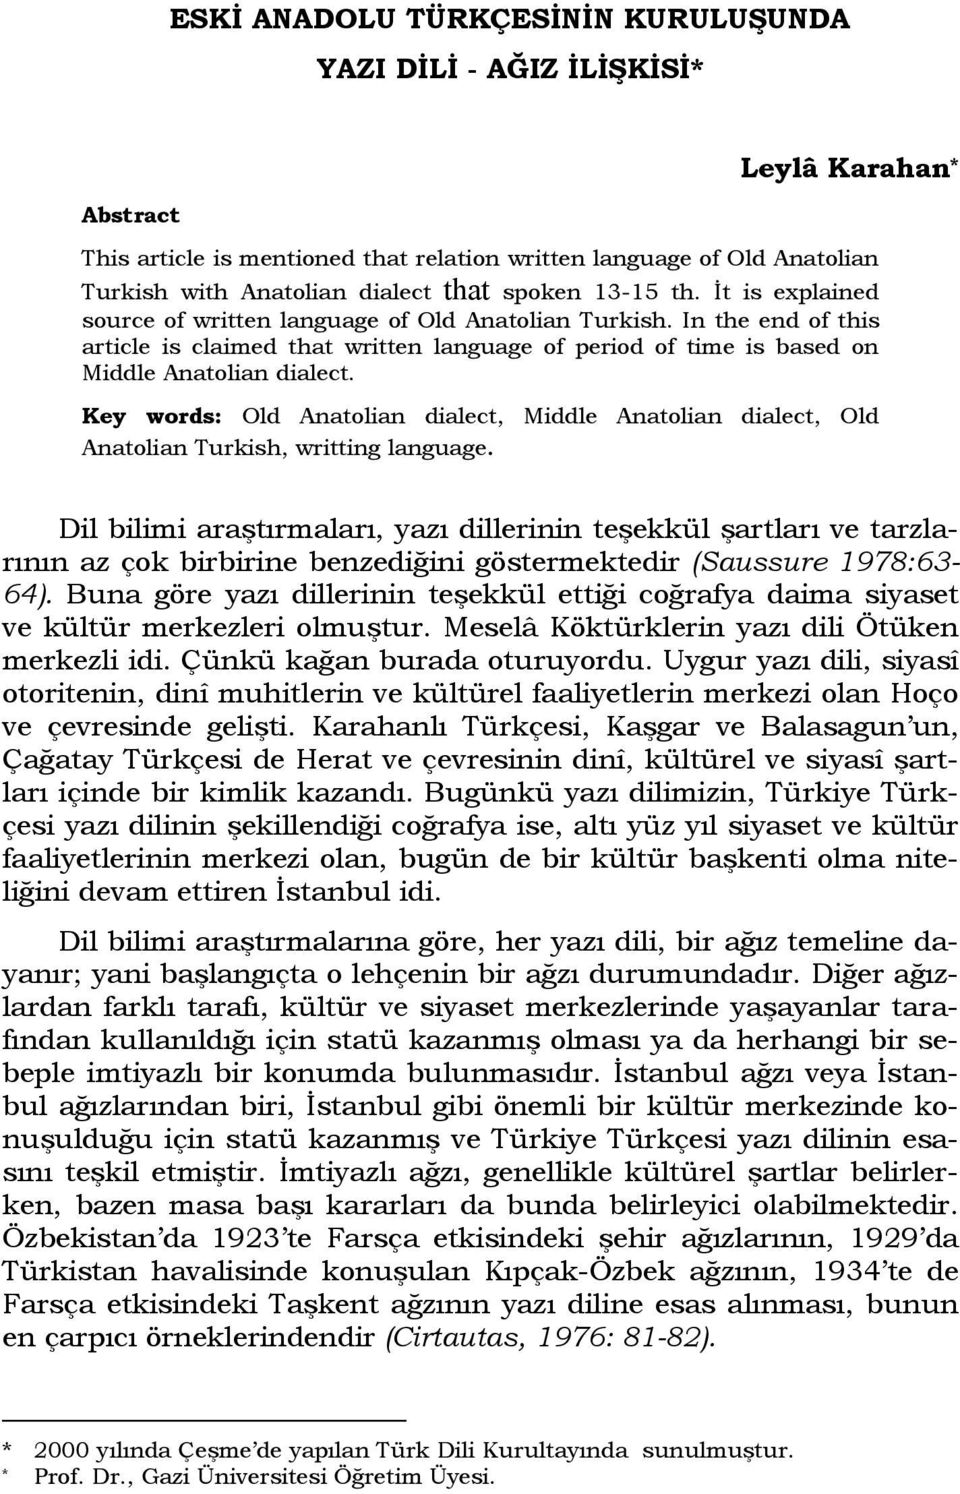 In the end of this article is claimed that written language of period of time is based on Middle Anatolian dialect.